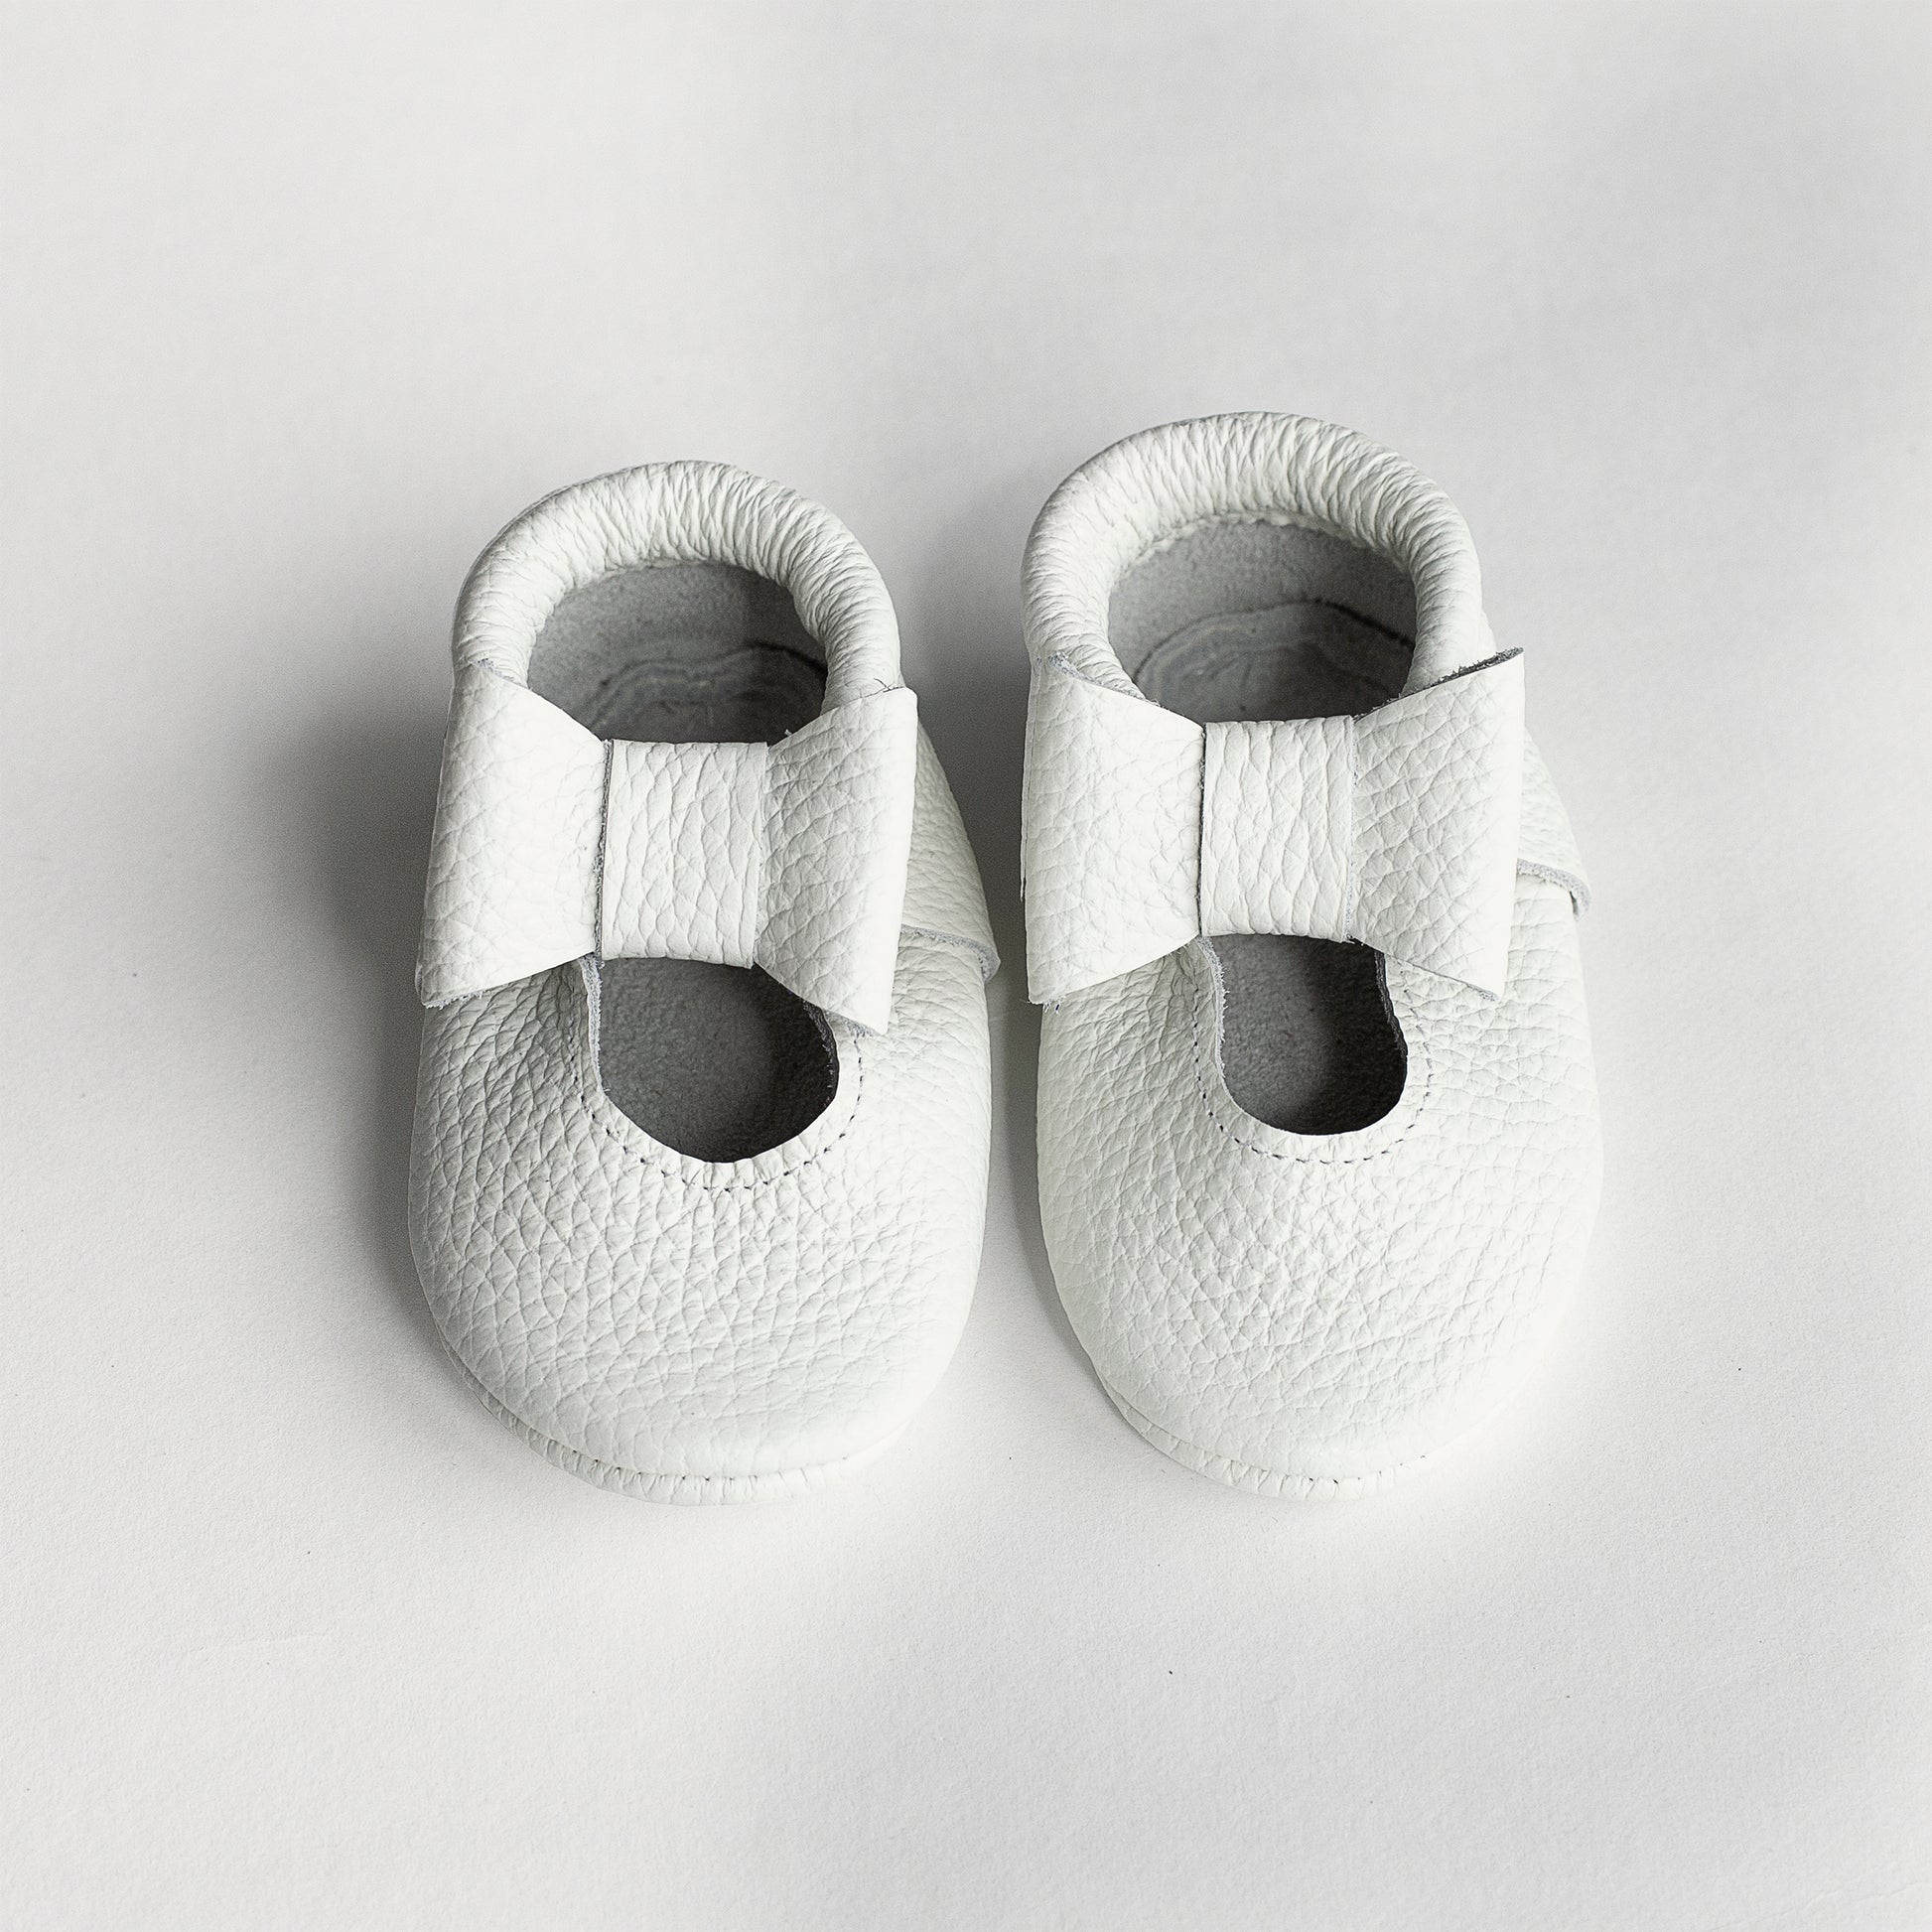 Bow Baby Moccasins